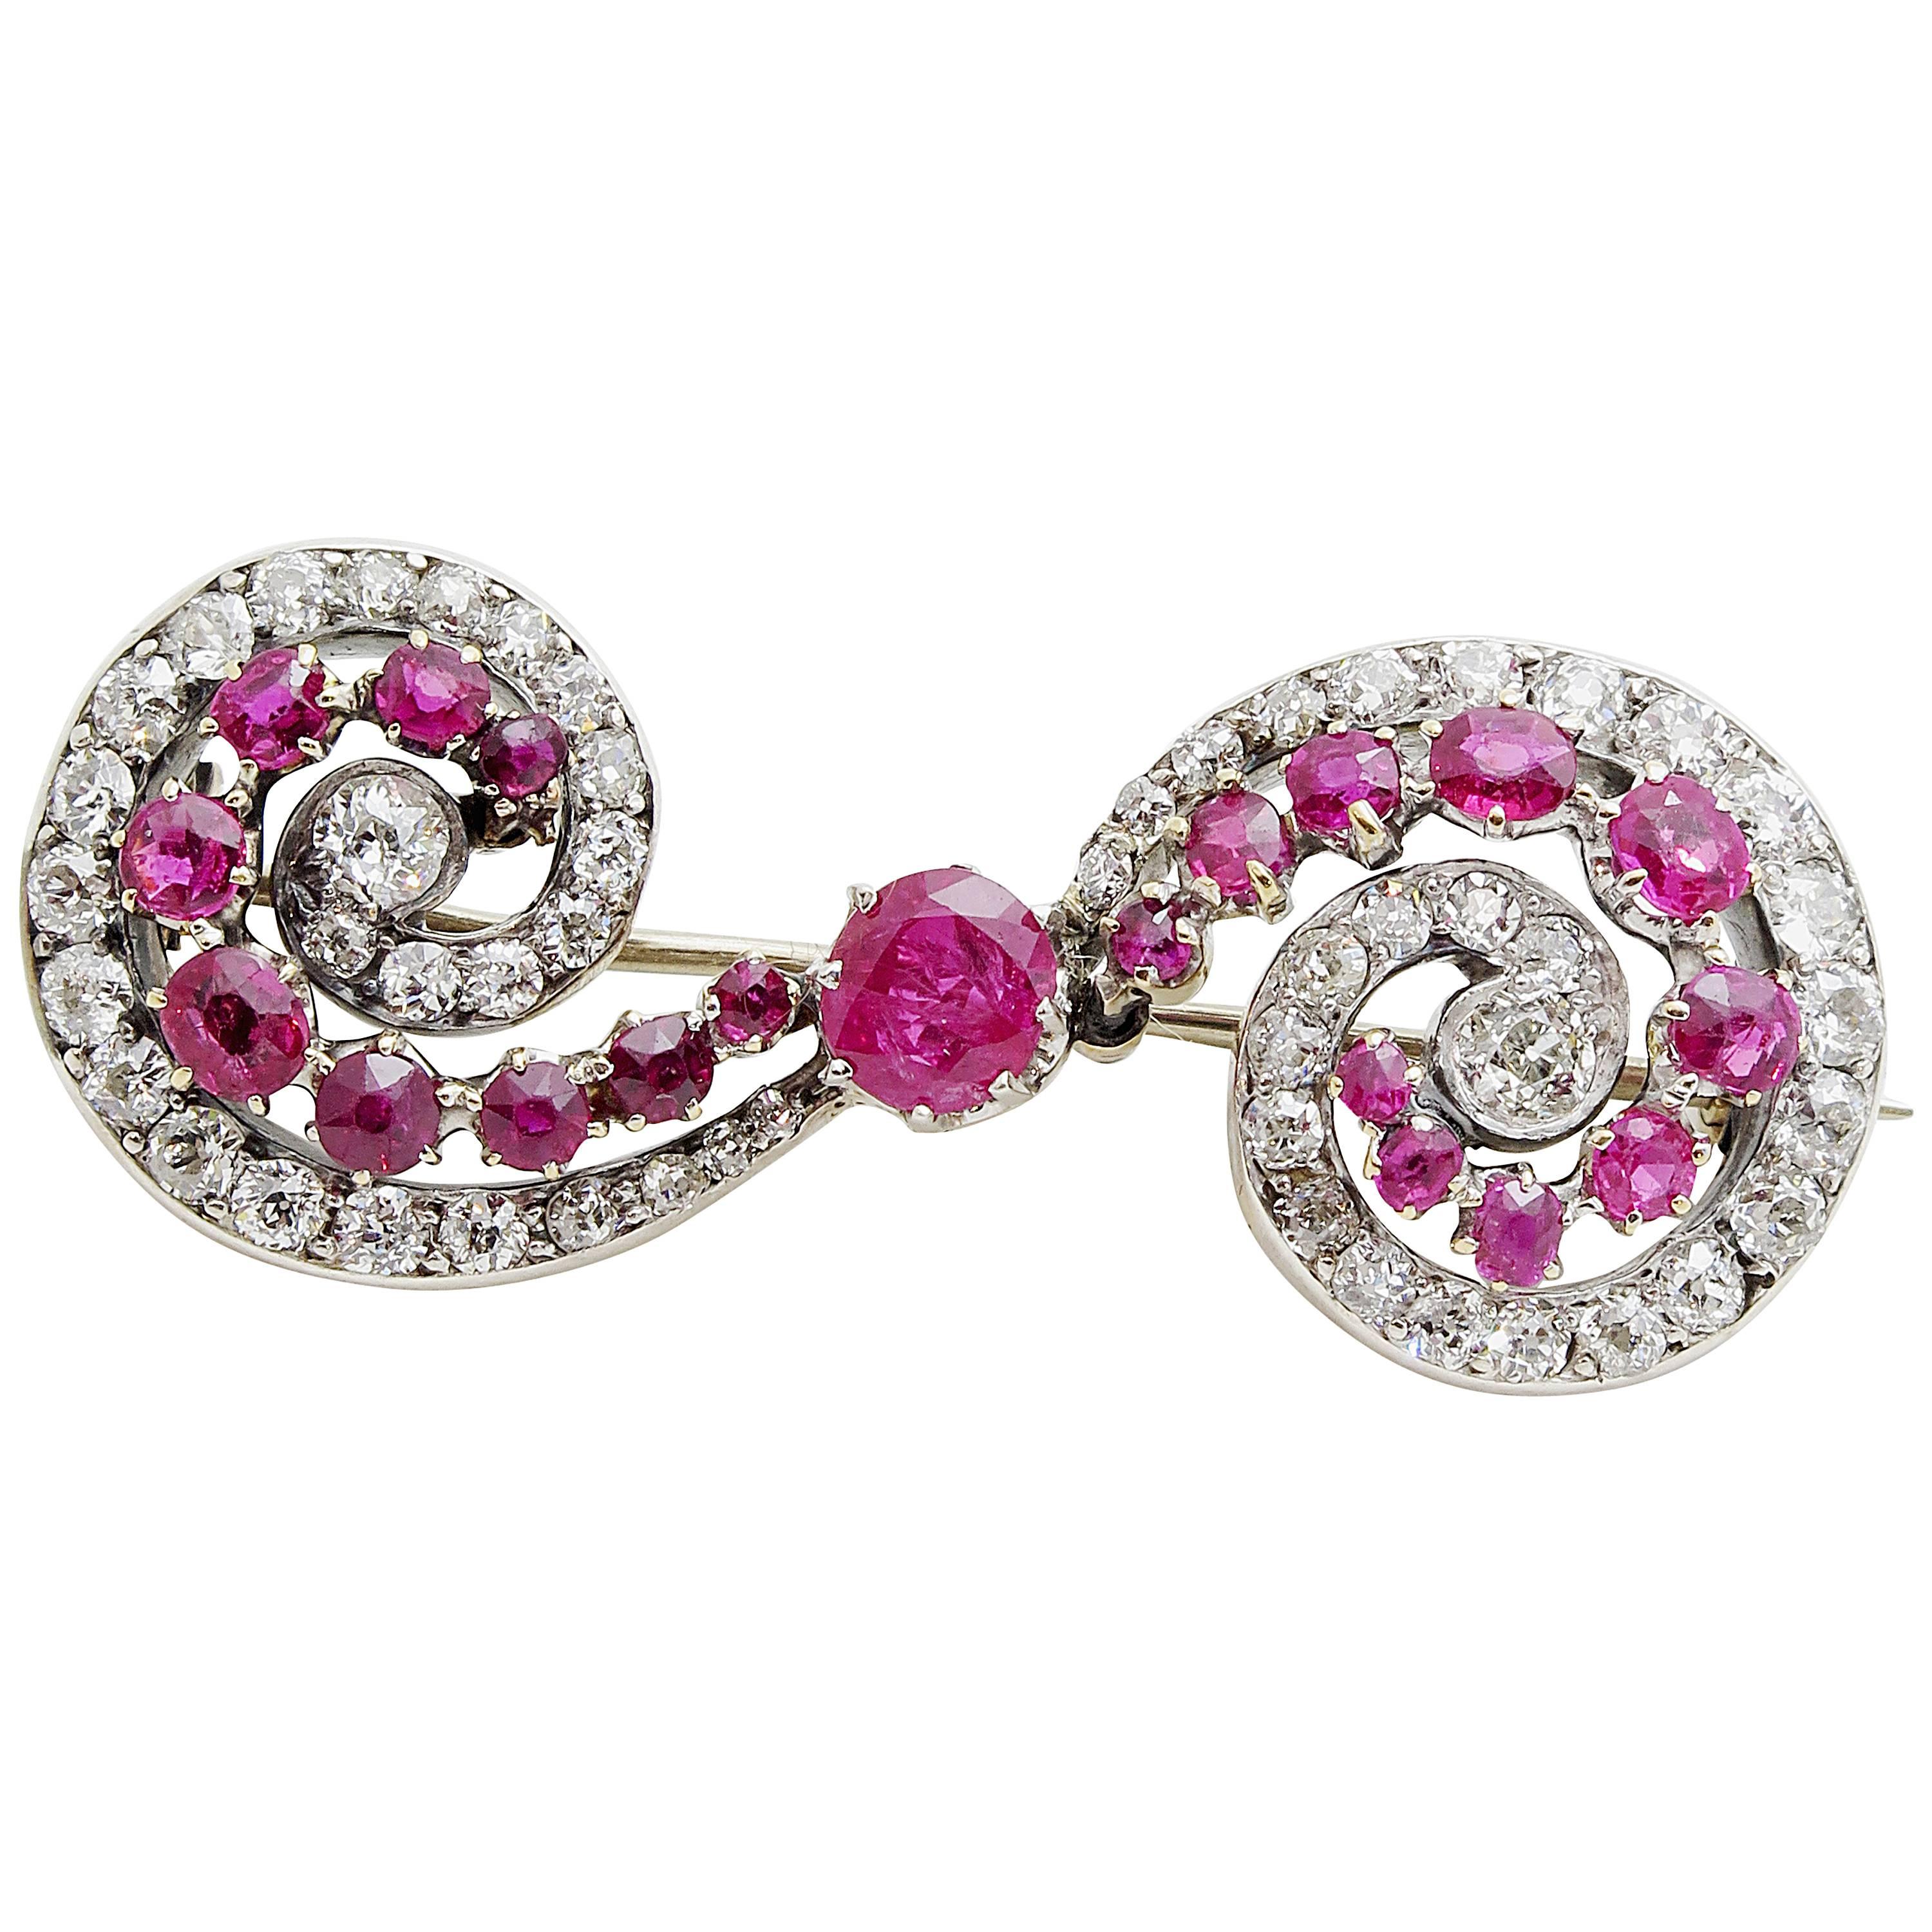 Victorian Ruby and Diamond Brooch, Late 19th Century